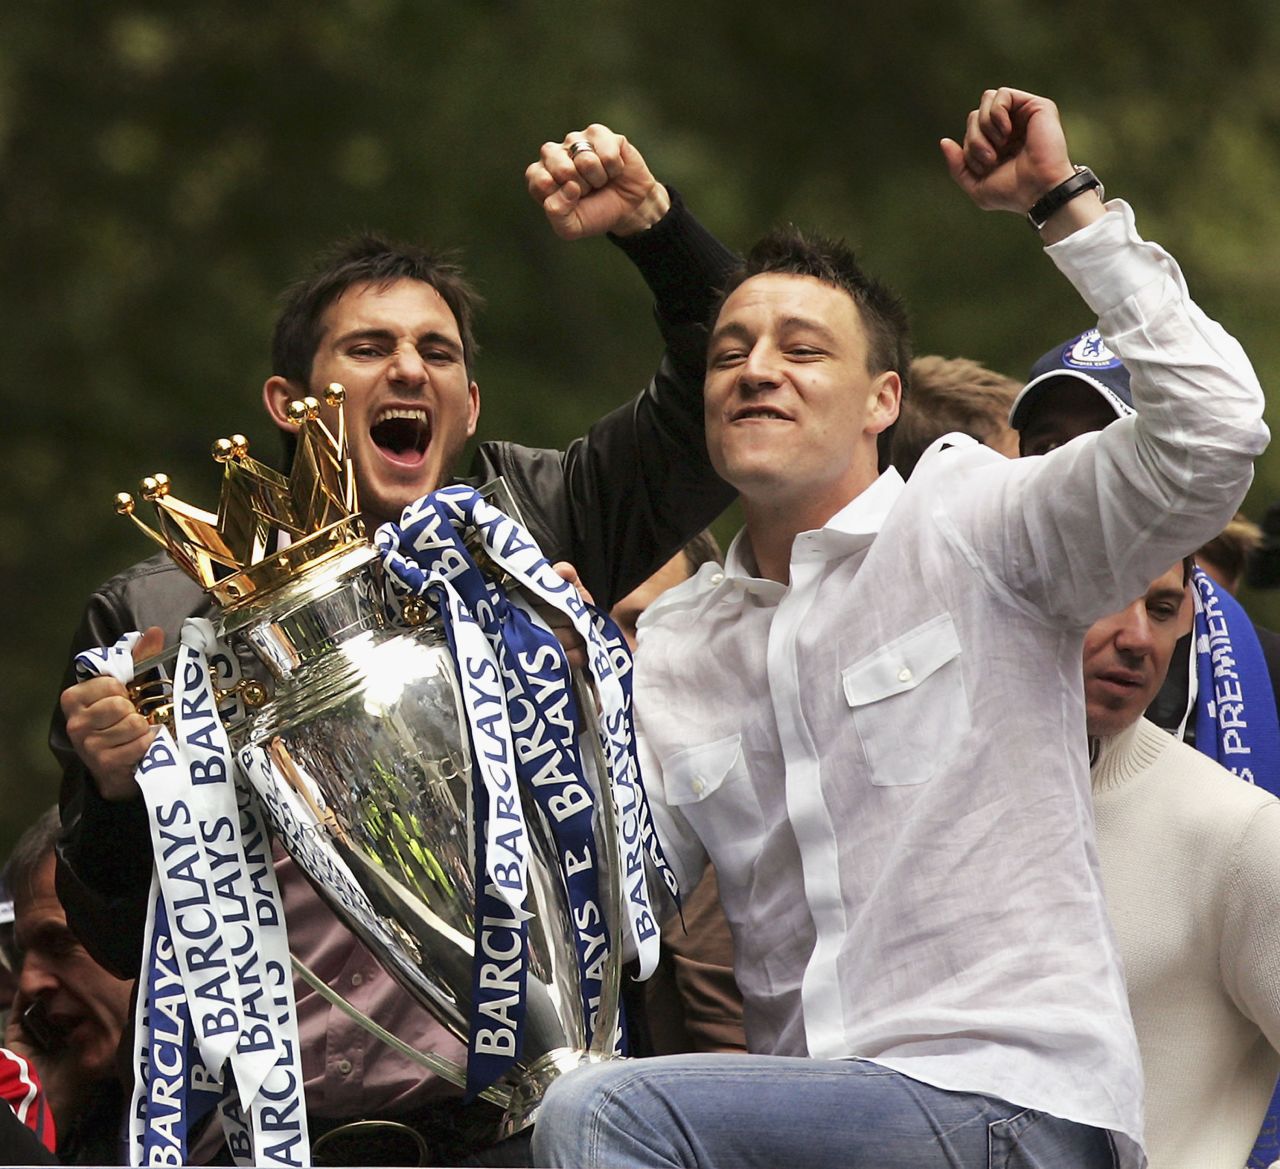 In his first full season as captain, Terry led Chelsea to a first English top-flight title in 50 years.